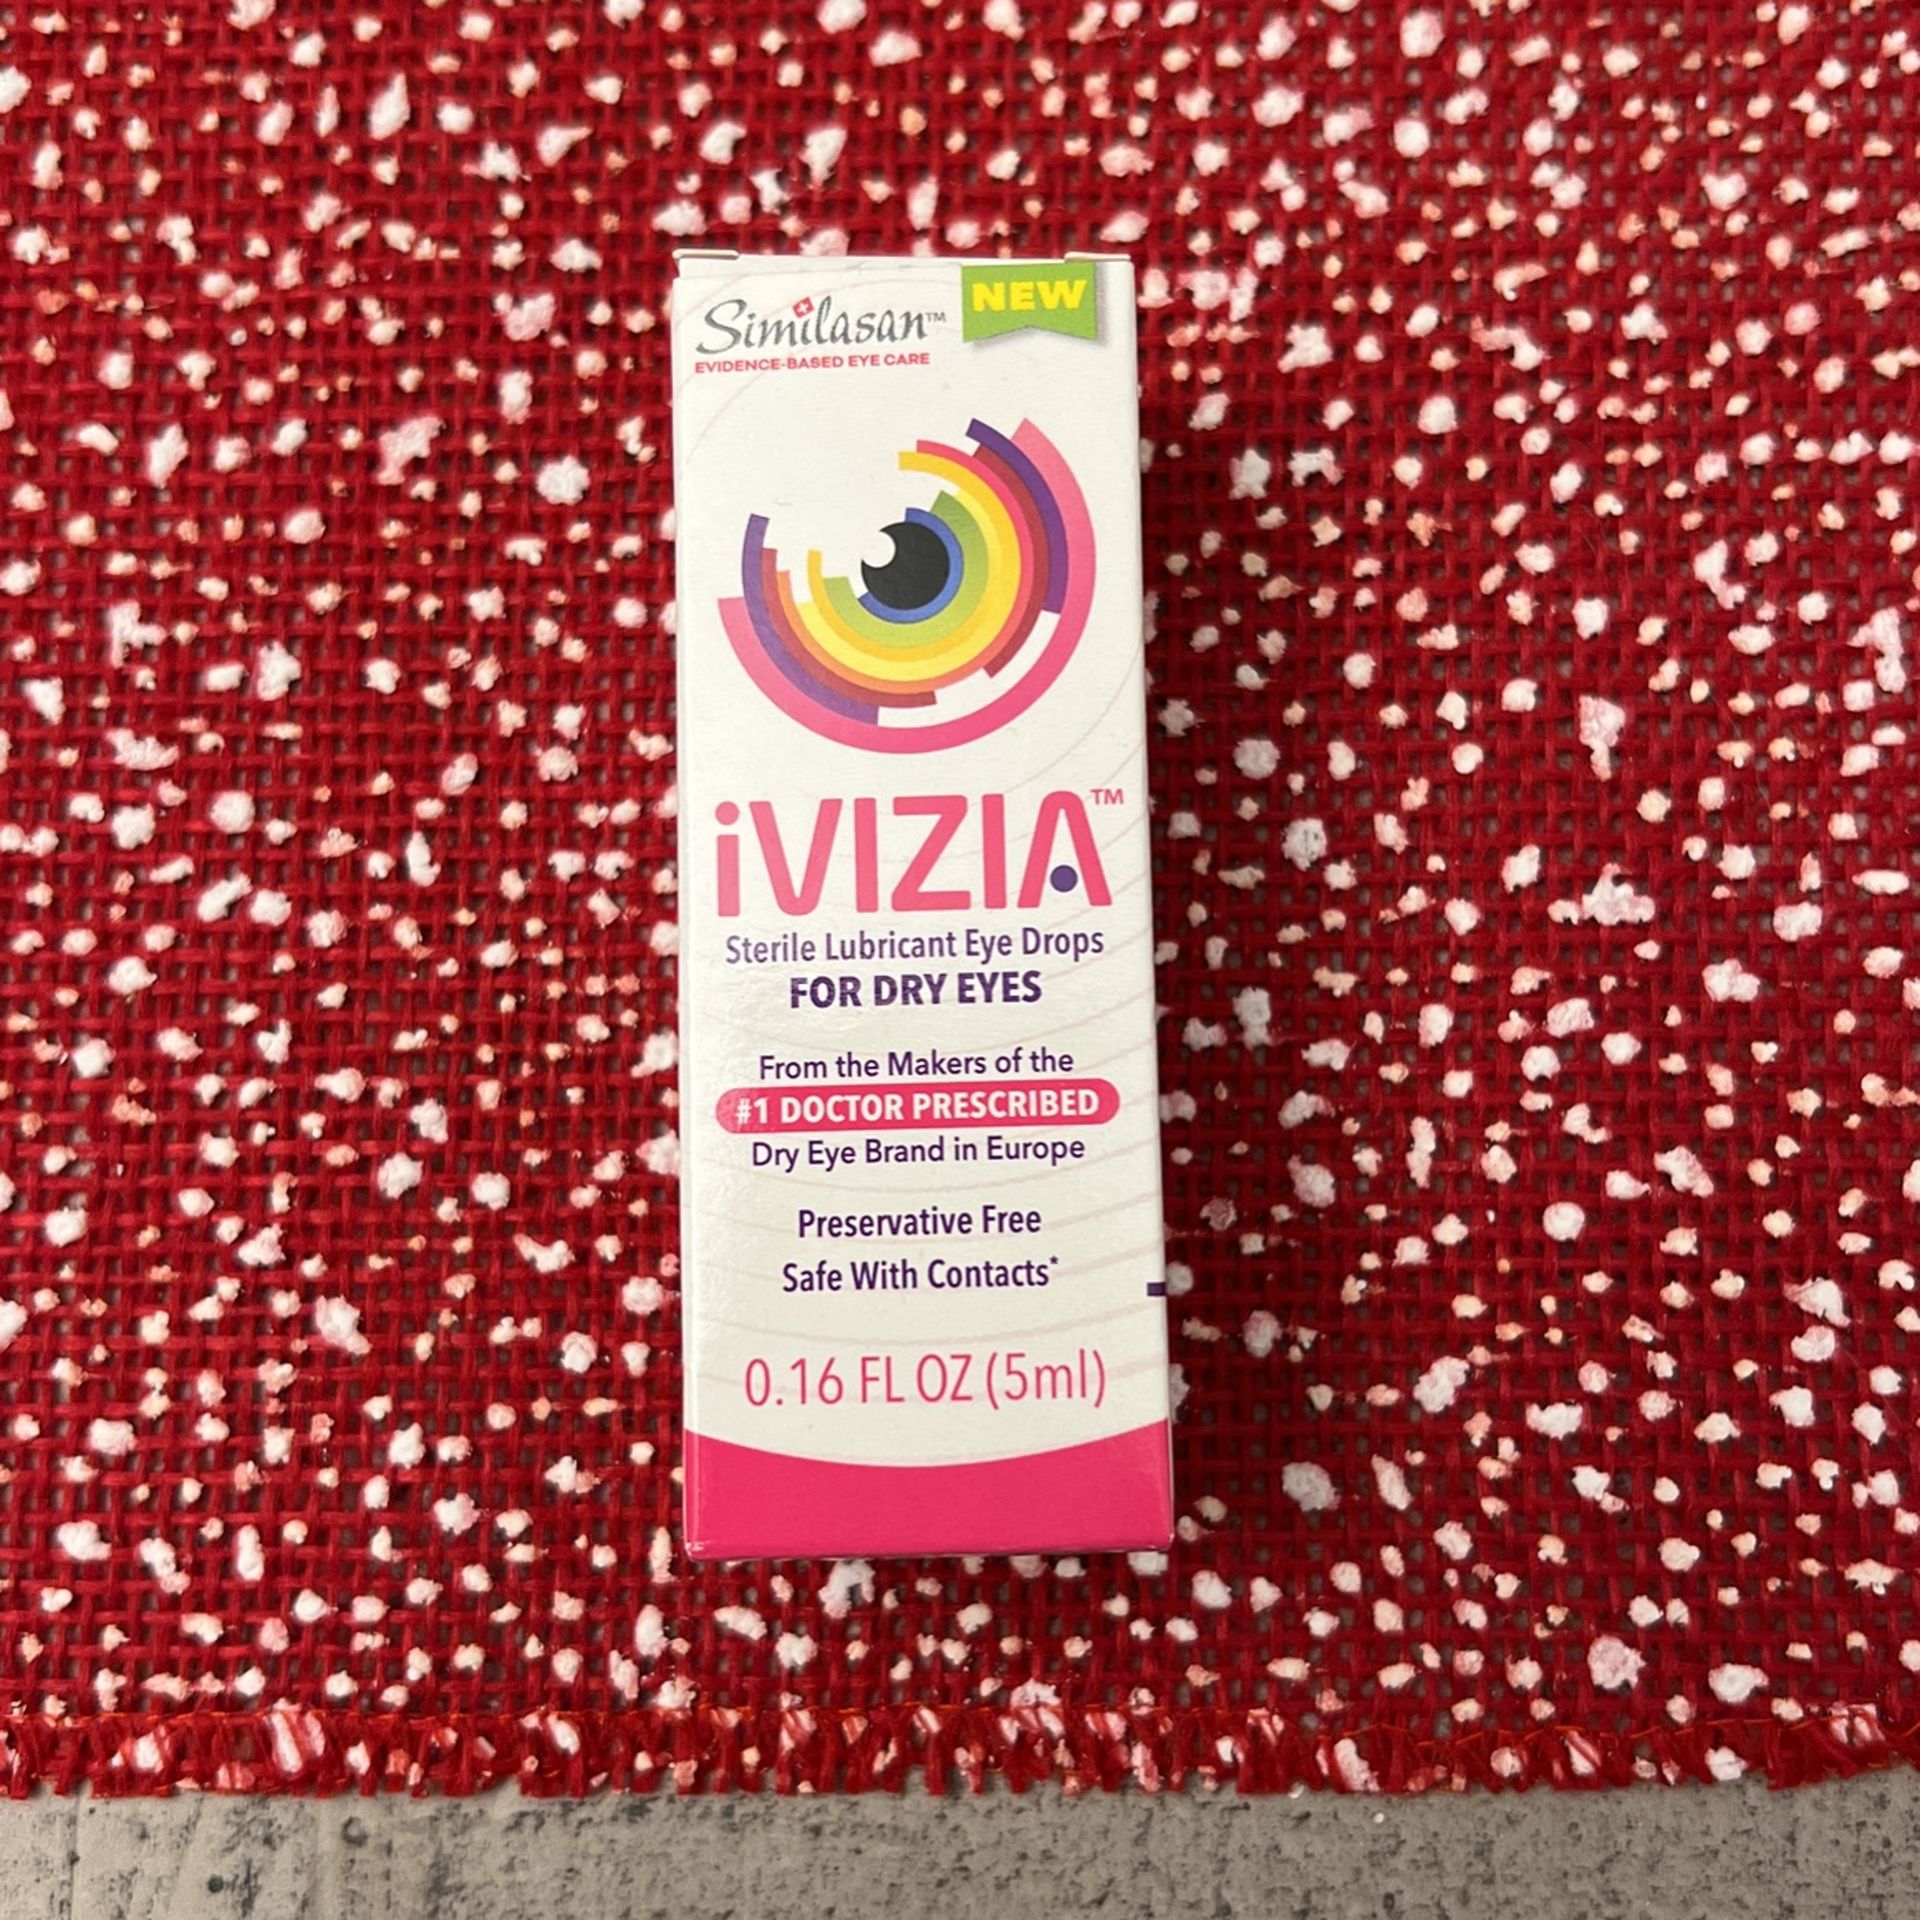 iVIZIA Sterile Lubricant Eye Drops for Dry Eyes, Preservative-Free, Moisturizing, Dry Eye Relief, Contact Lens Friendly, 0.16 fl oz Bottle: